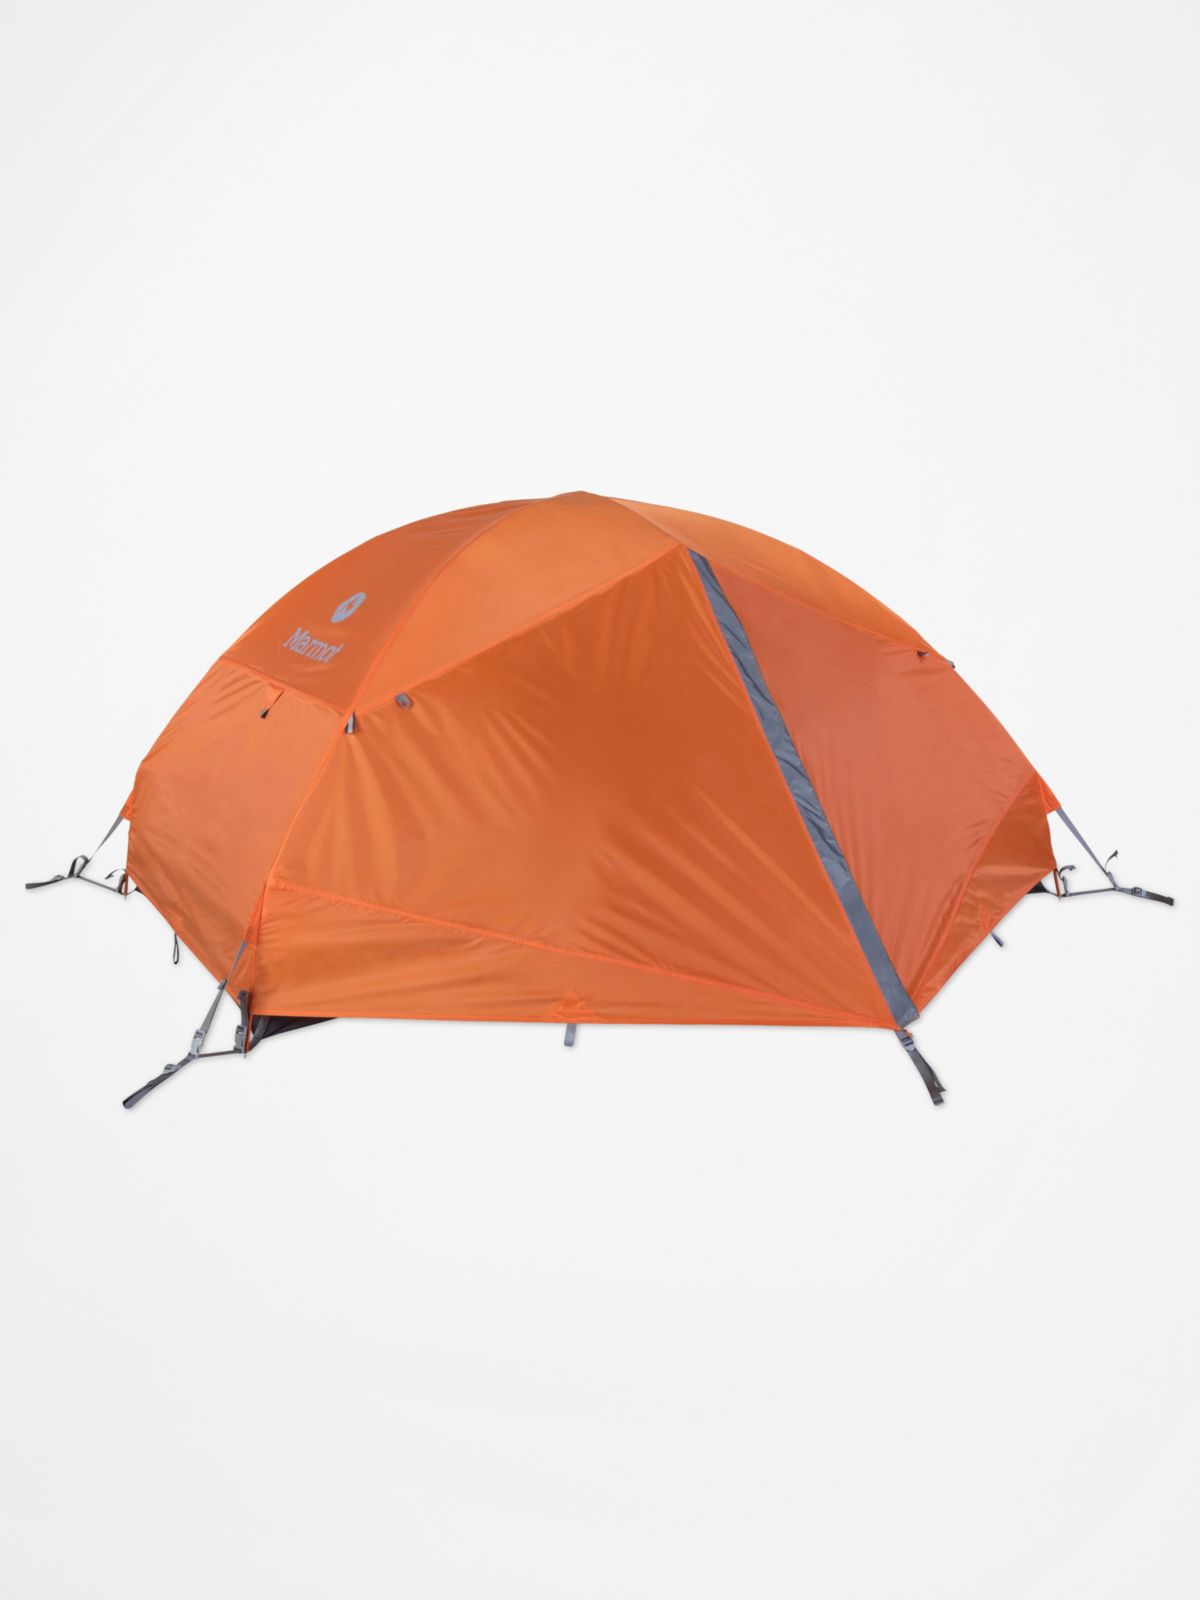 Fortress 2-Person Tent | Marmot